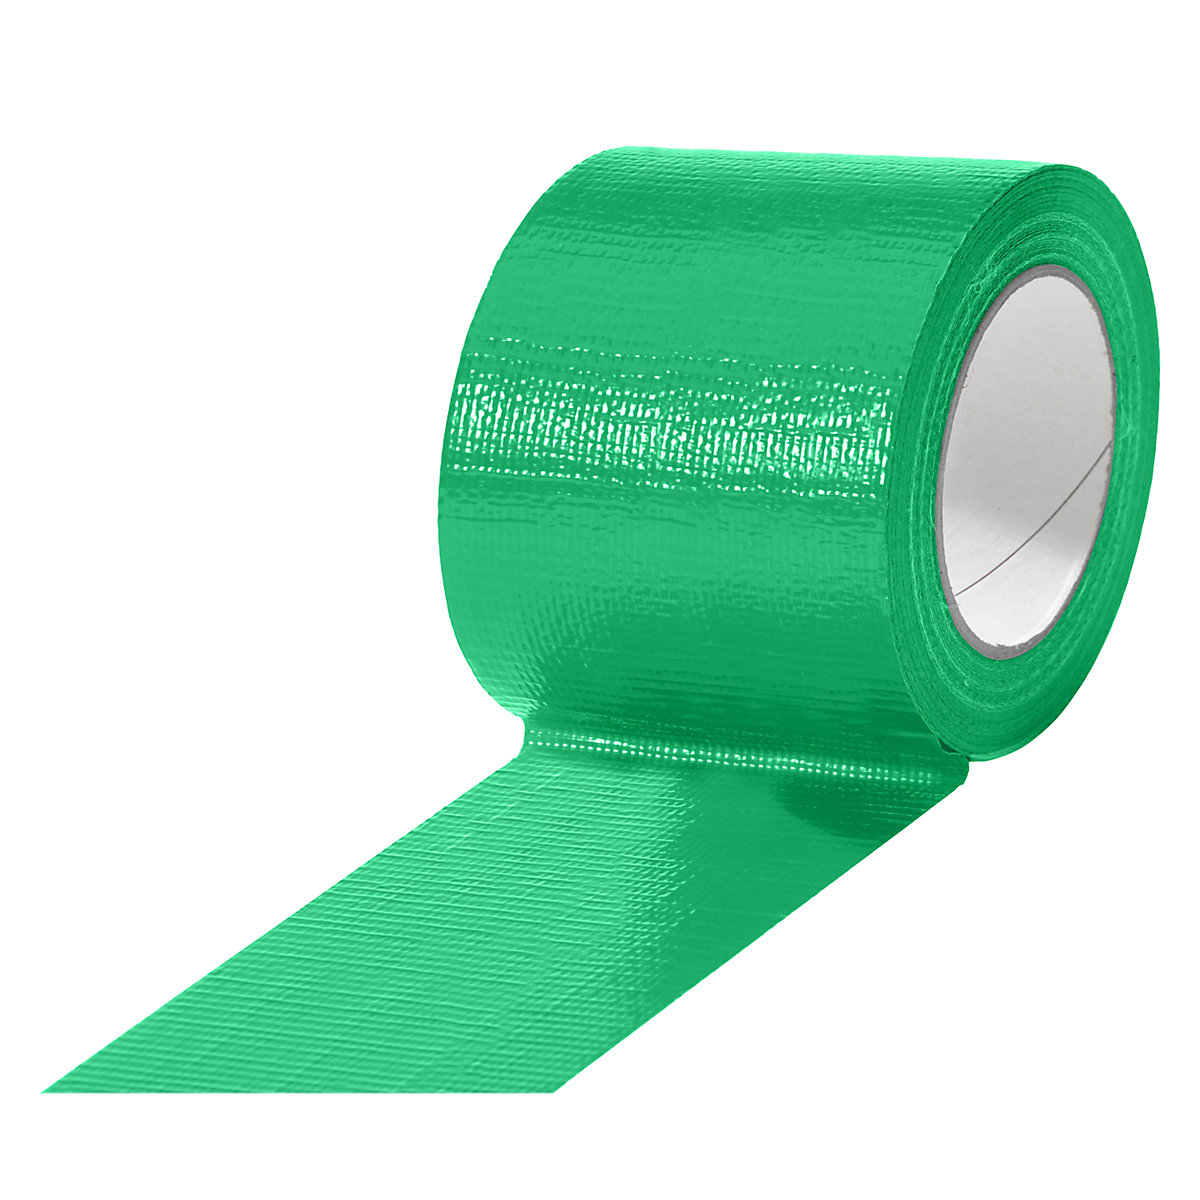 Fabric tape, in different colours, pack of 12 rolls, green, tape width 75 mm-14